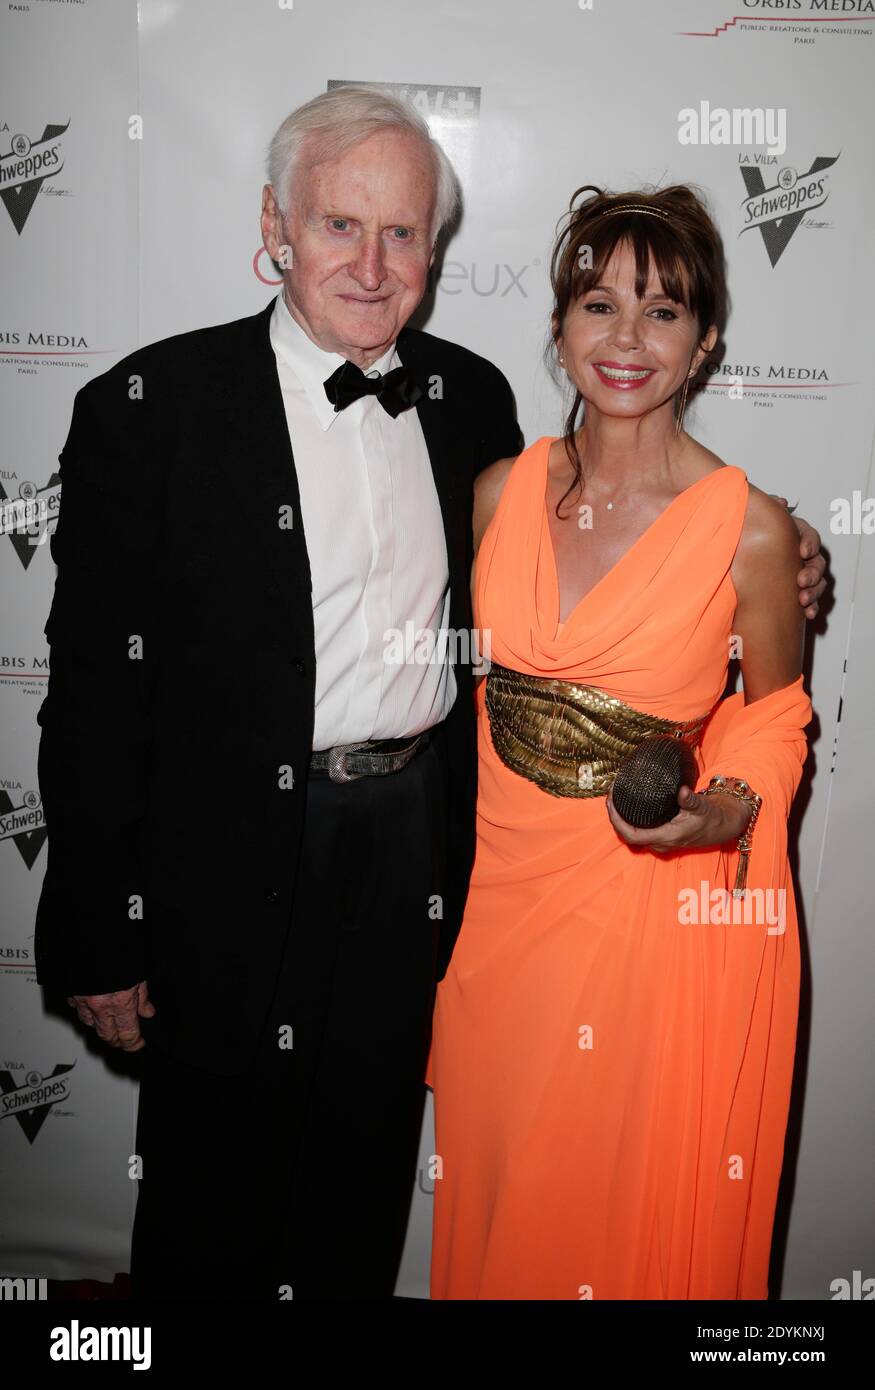 John Boorman and Victoria Abril attending the Angenieux Dinner in Cannes, France during the 66th Cannes Film Festival on May 24, 2013. Photo by Jerome Domine/ABACAPRESS.COM Stock Photo